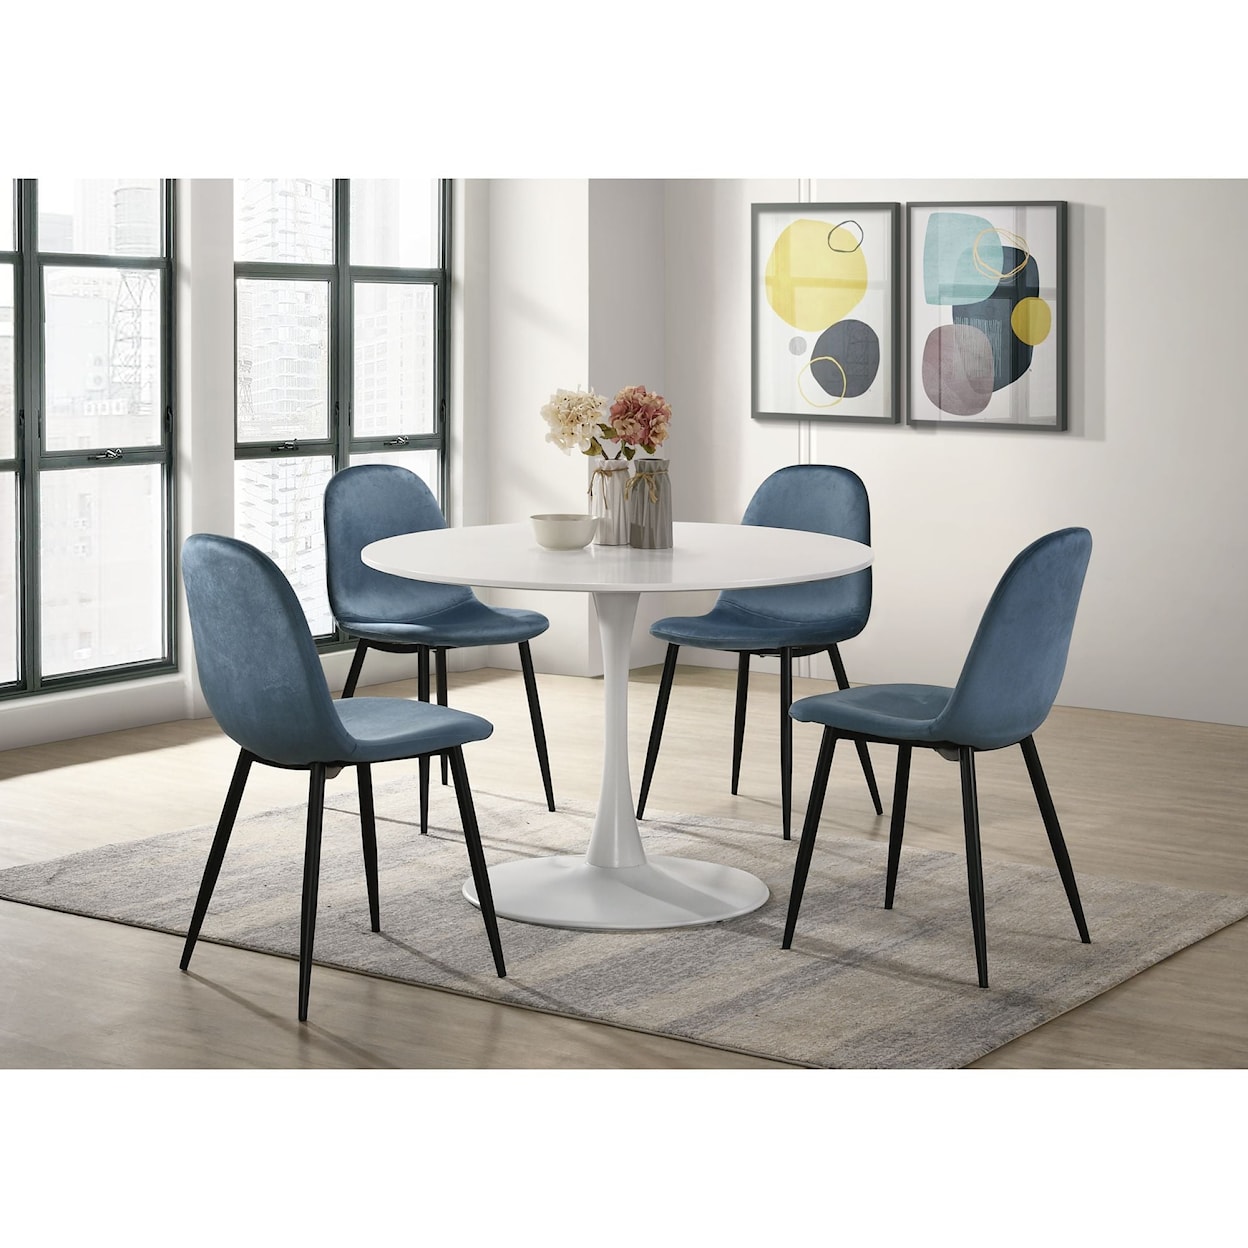 Elements Isadora Set of 2 Side Chairs